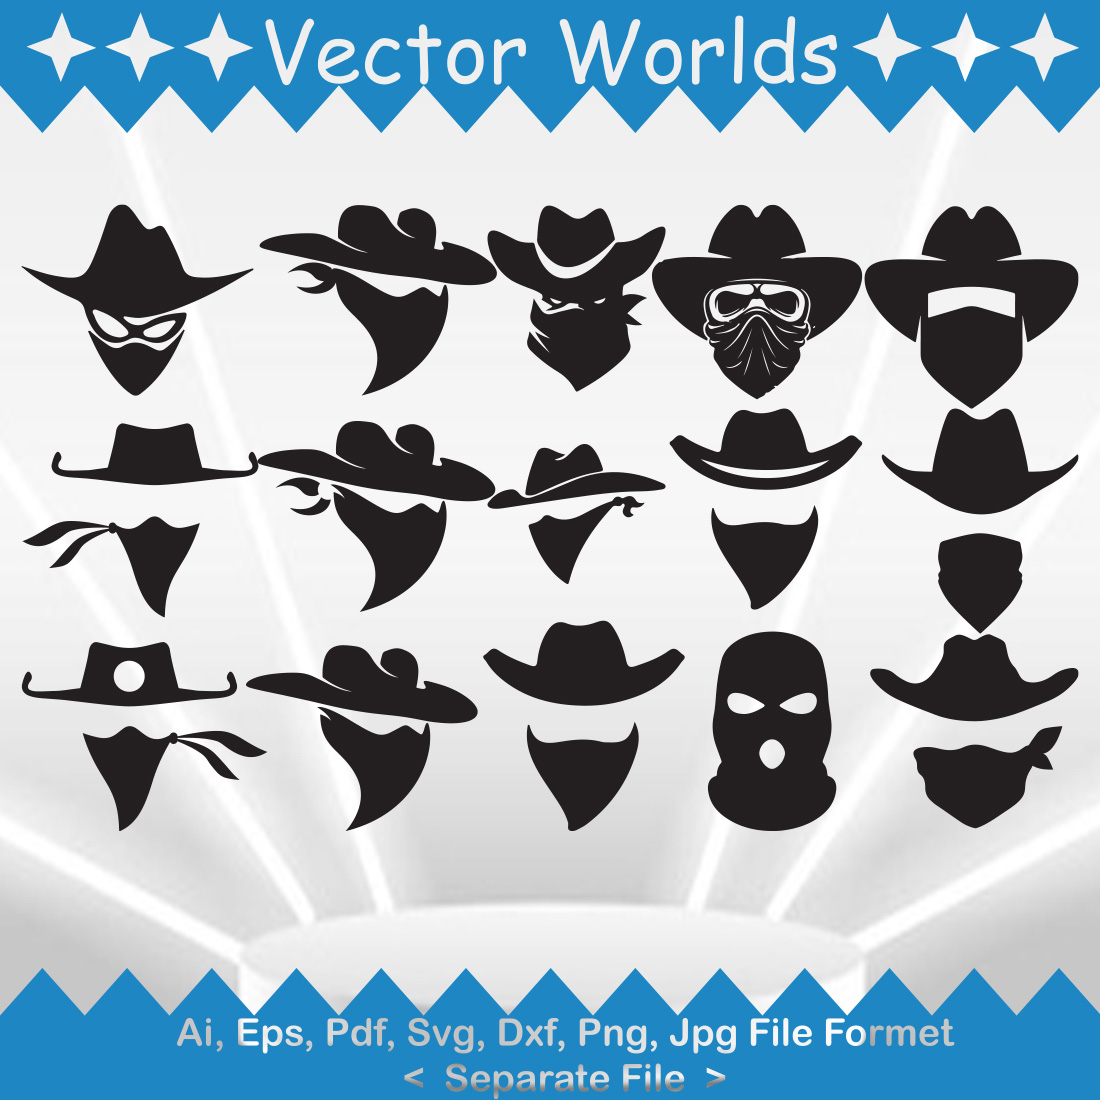 Pack of vector images of faces of bandits in cowboy hats and masks.